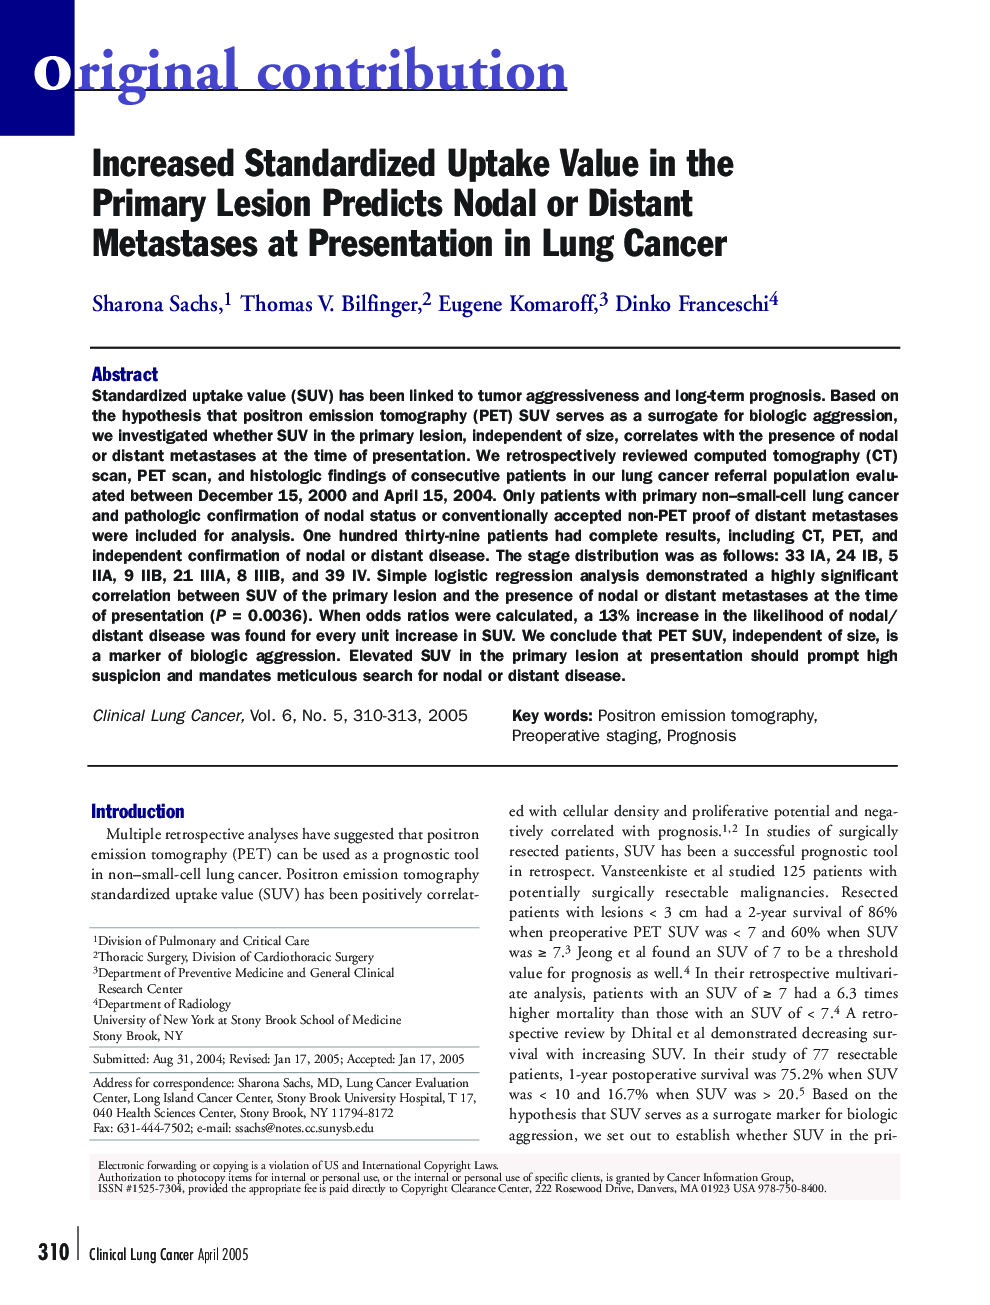 Increased Standardized Uptake Value in the Primary Lesion Predicts Nodal or Distant Metastases at Presentation in Lung Cancer